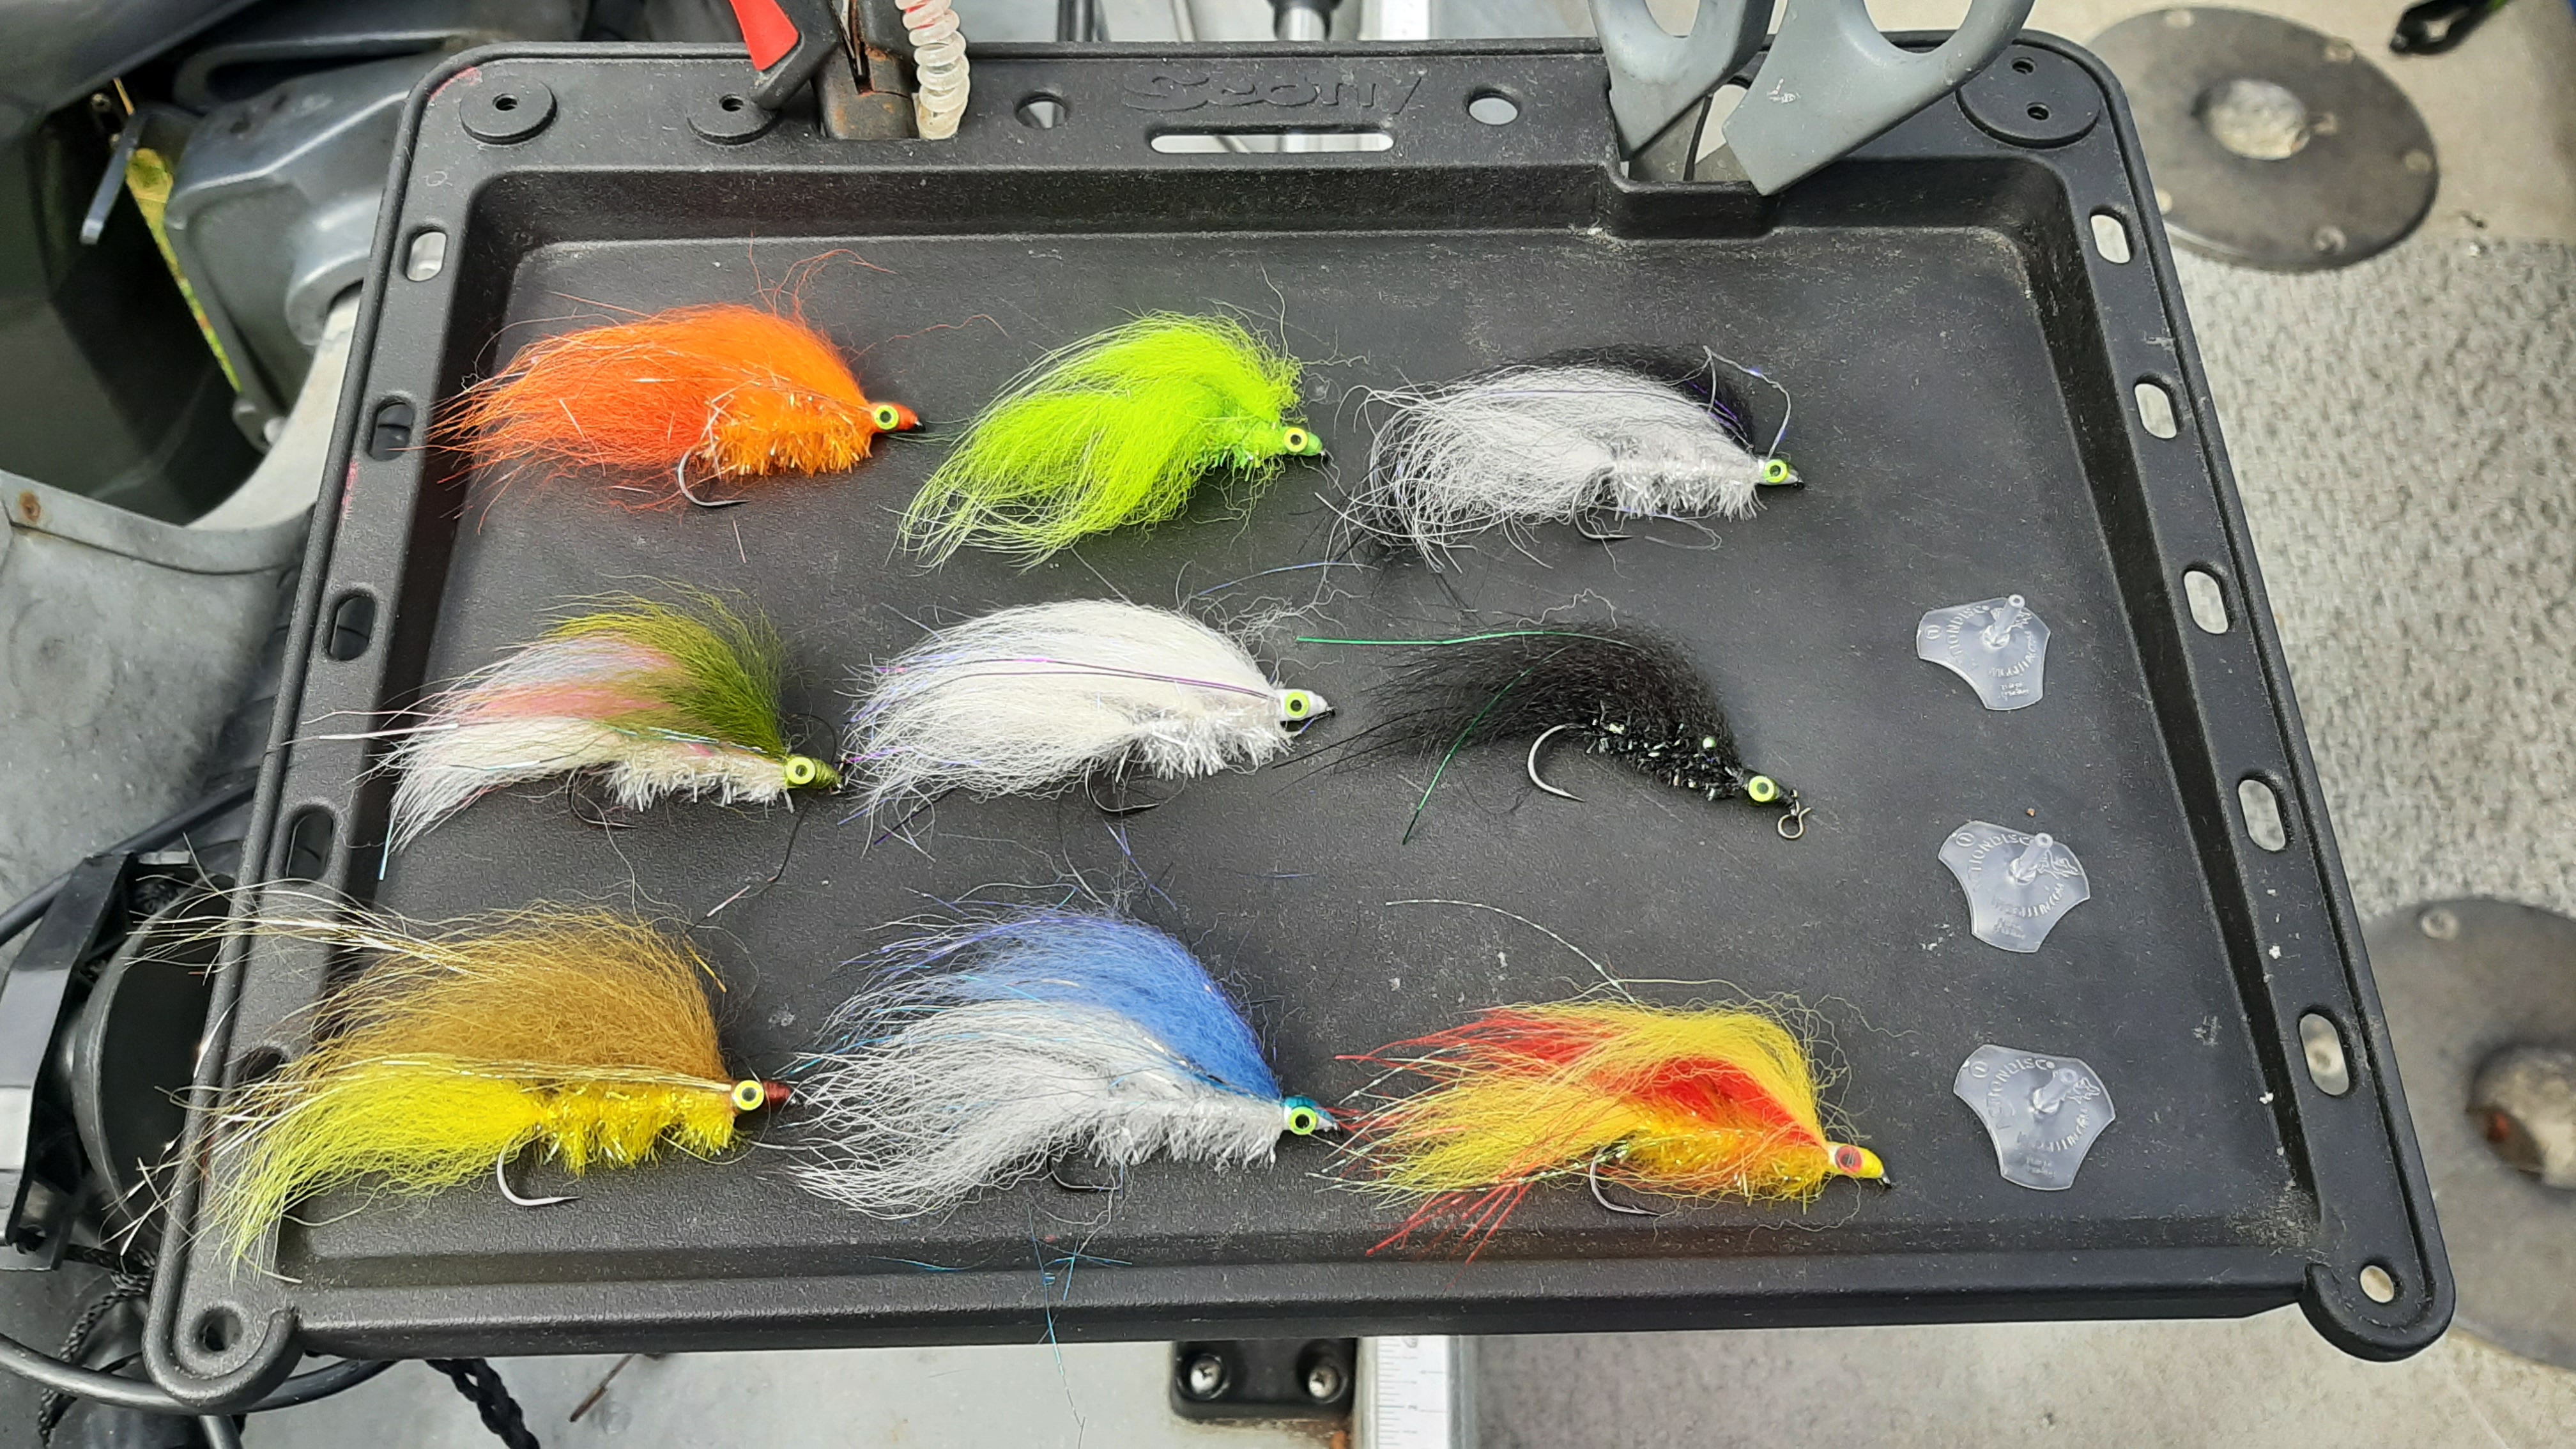 Trolling Flies for Trout - NWFR